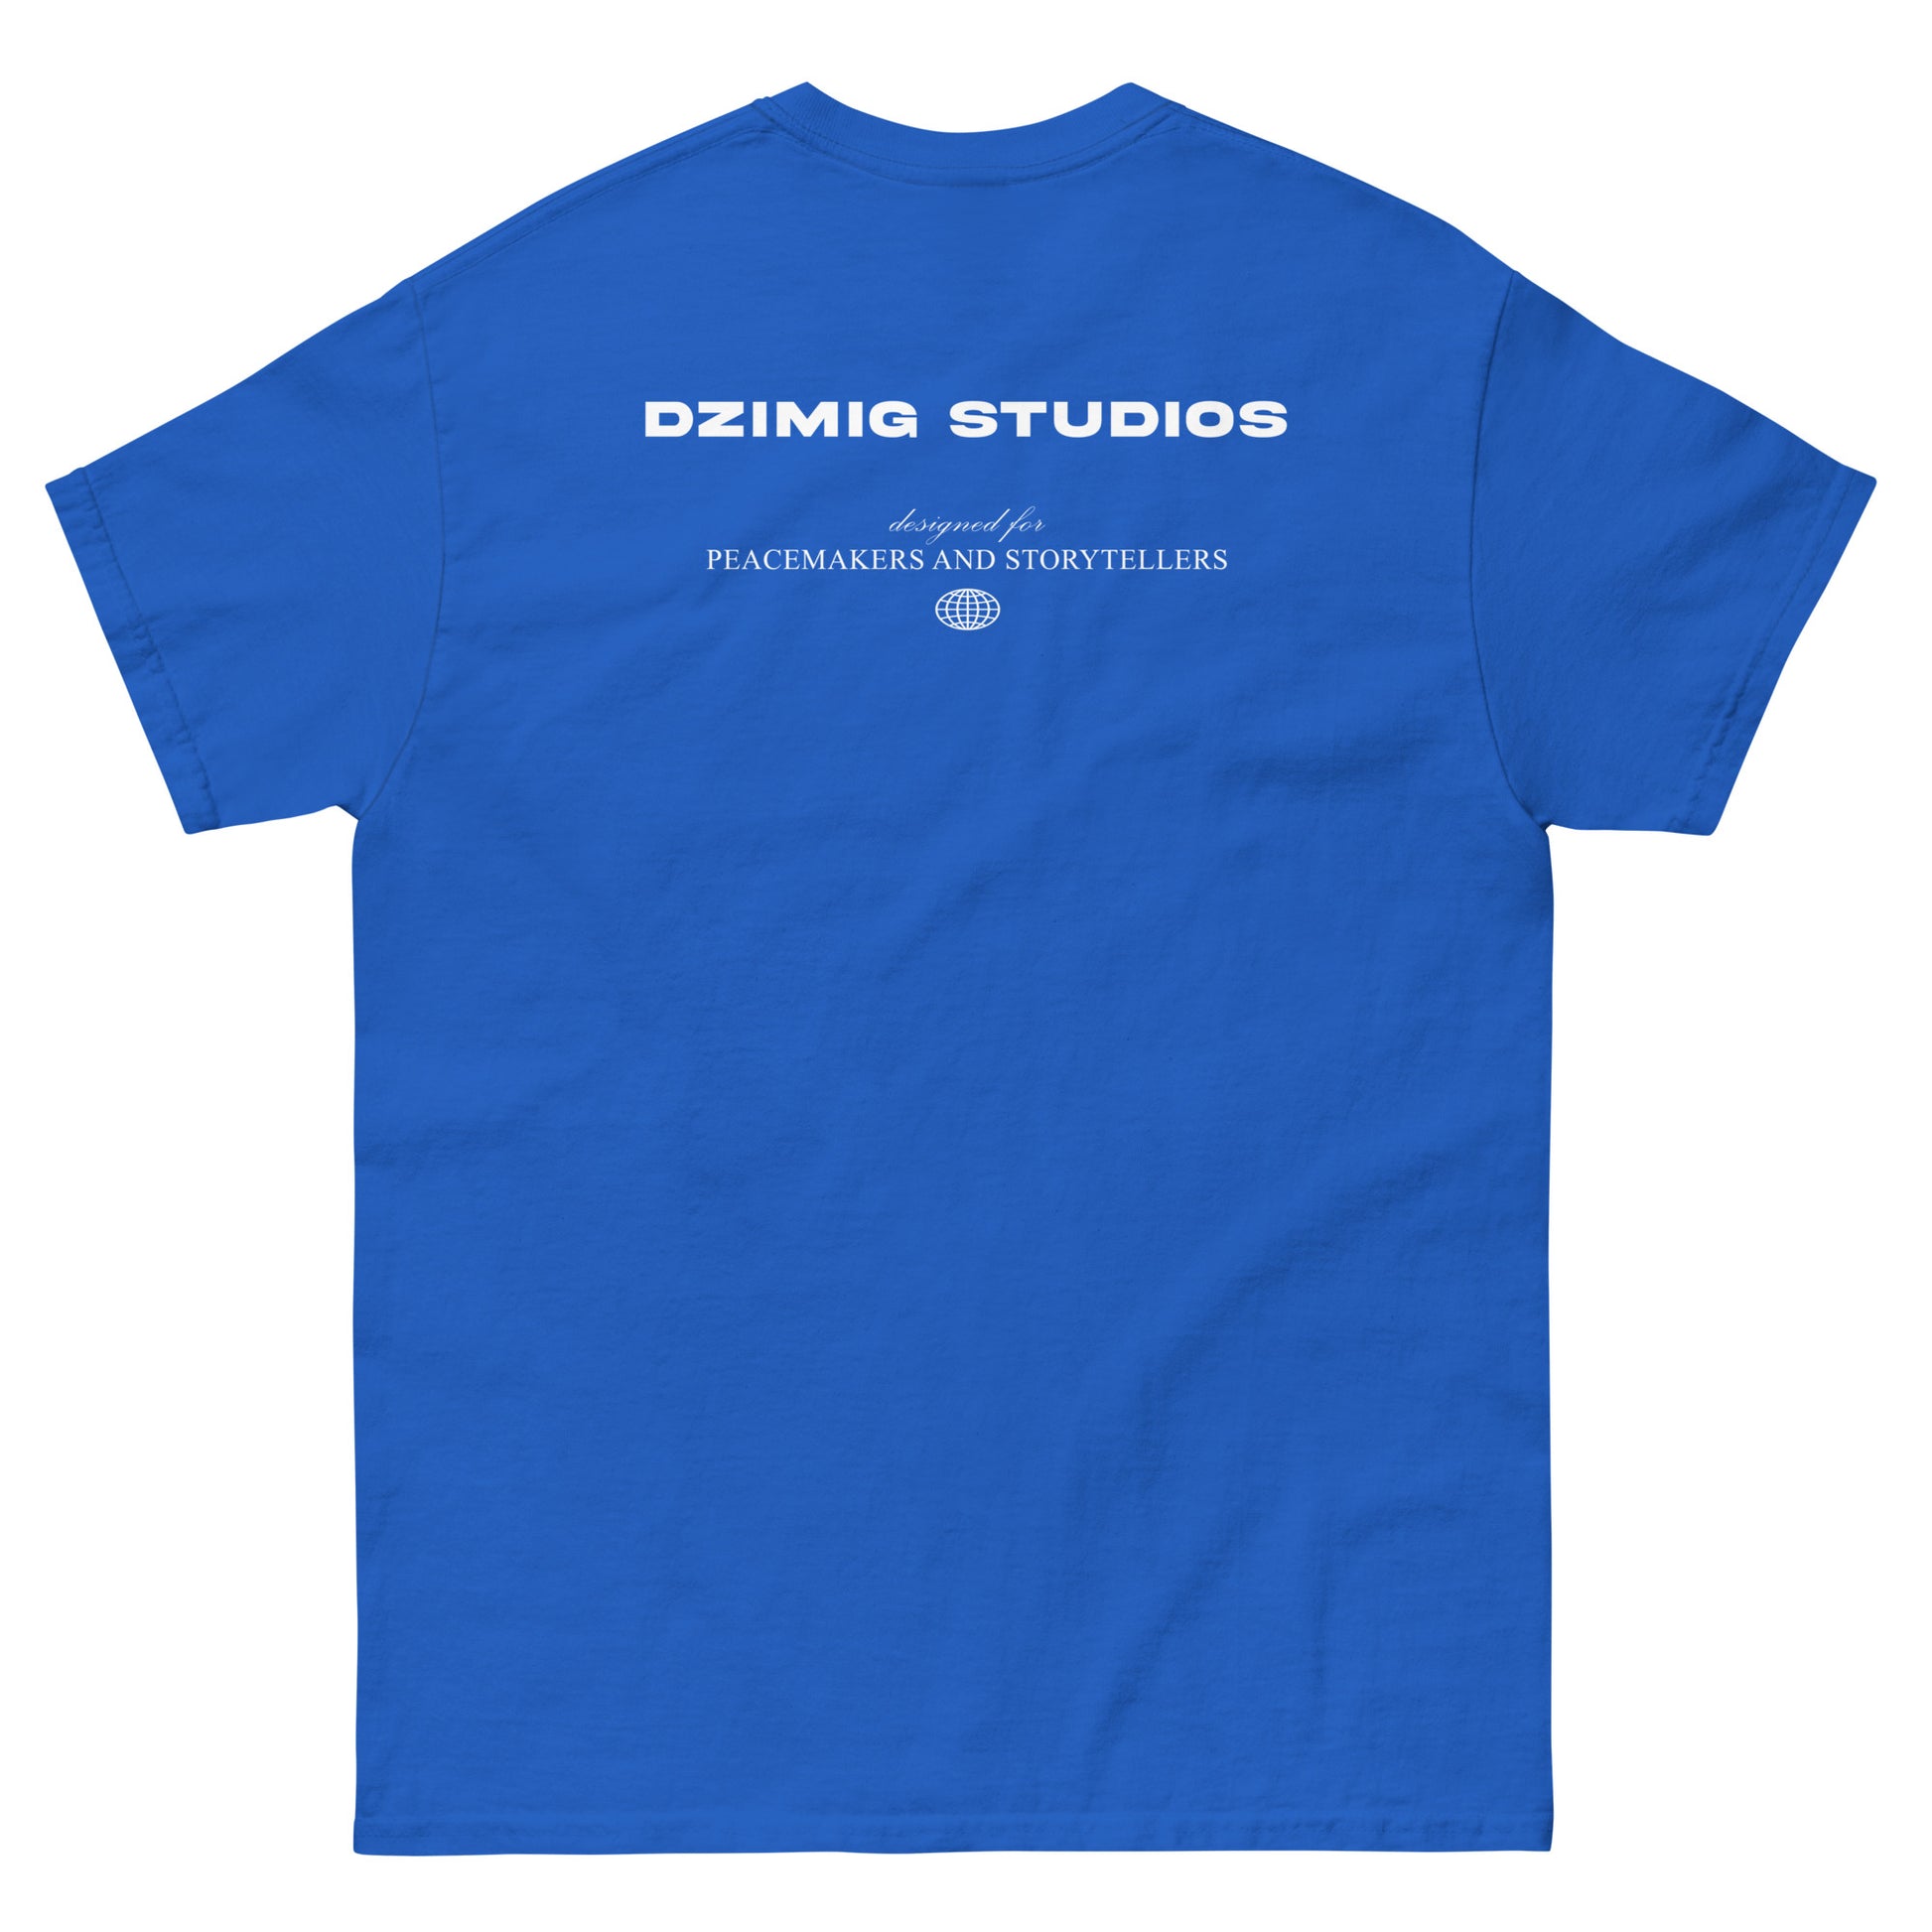 Dzimig Studios' Unisex Classic  Tee perfect for everyday casual wear.  These tees are designed under Dzimig Studios' Peace Campaign Project.